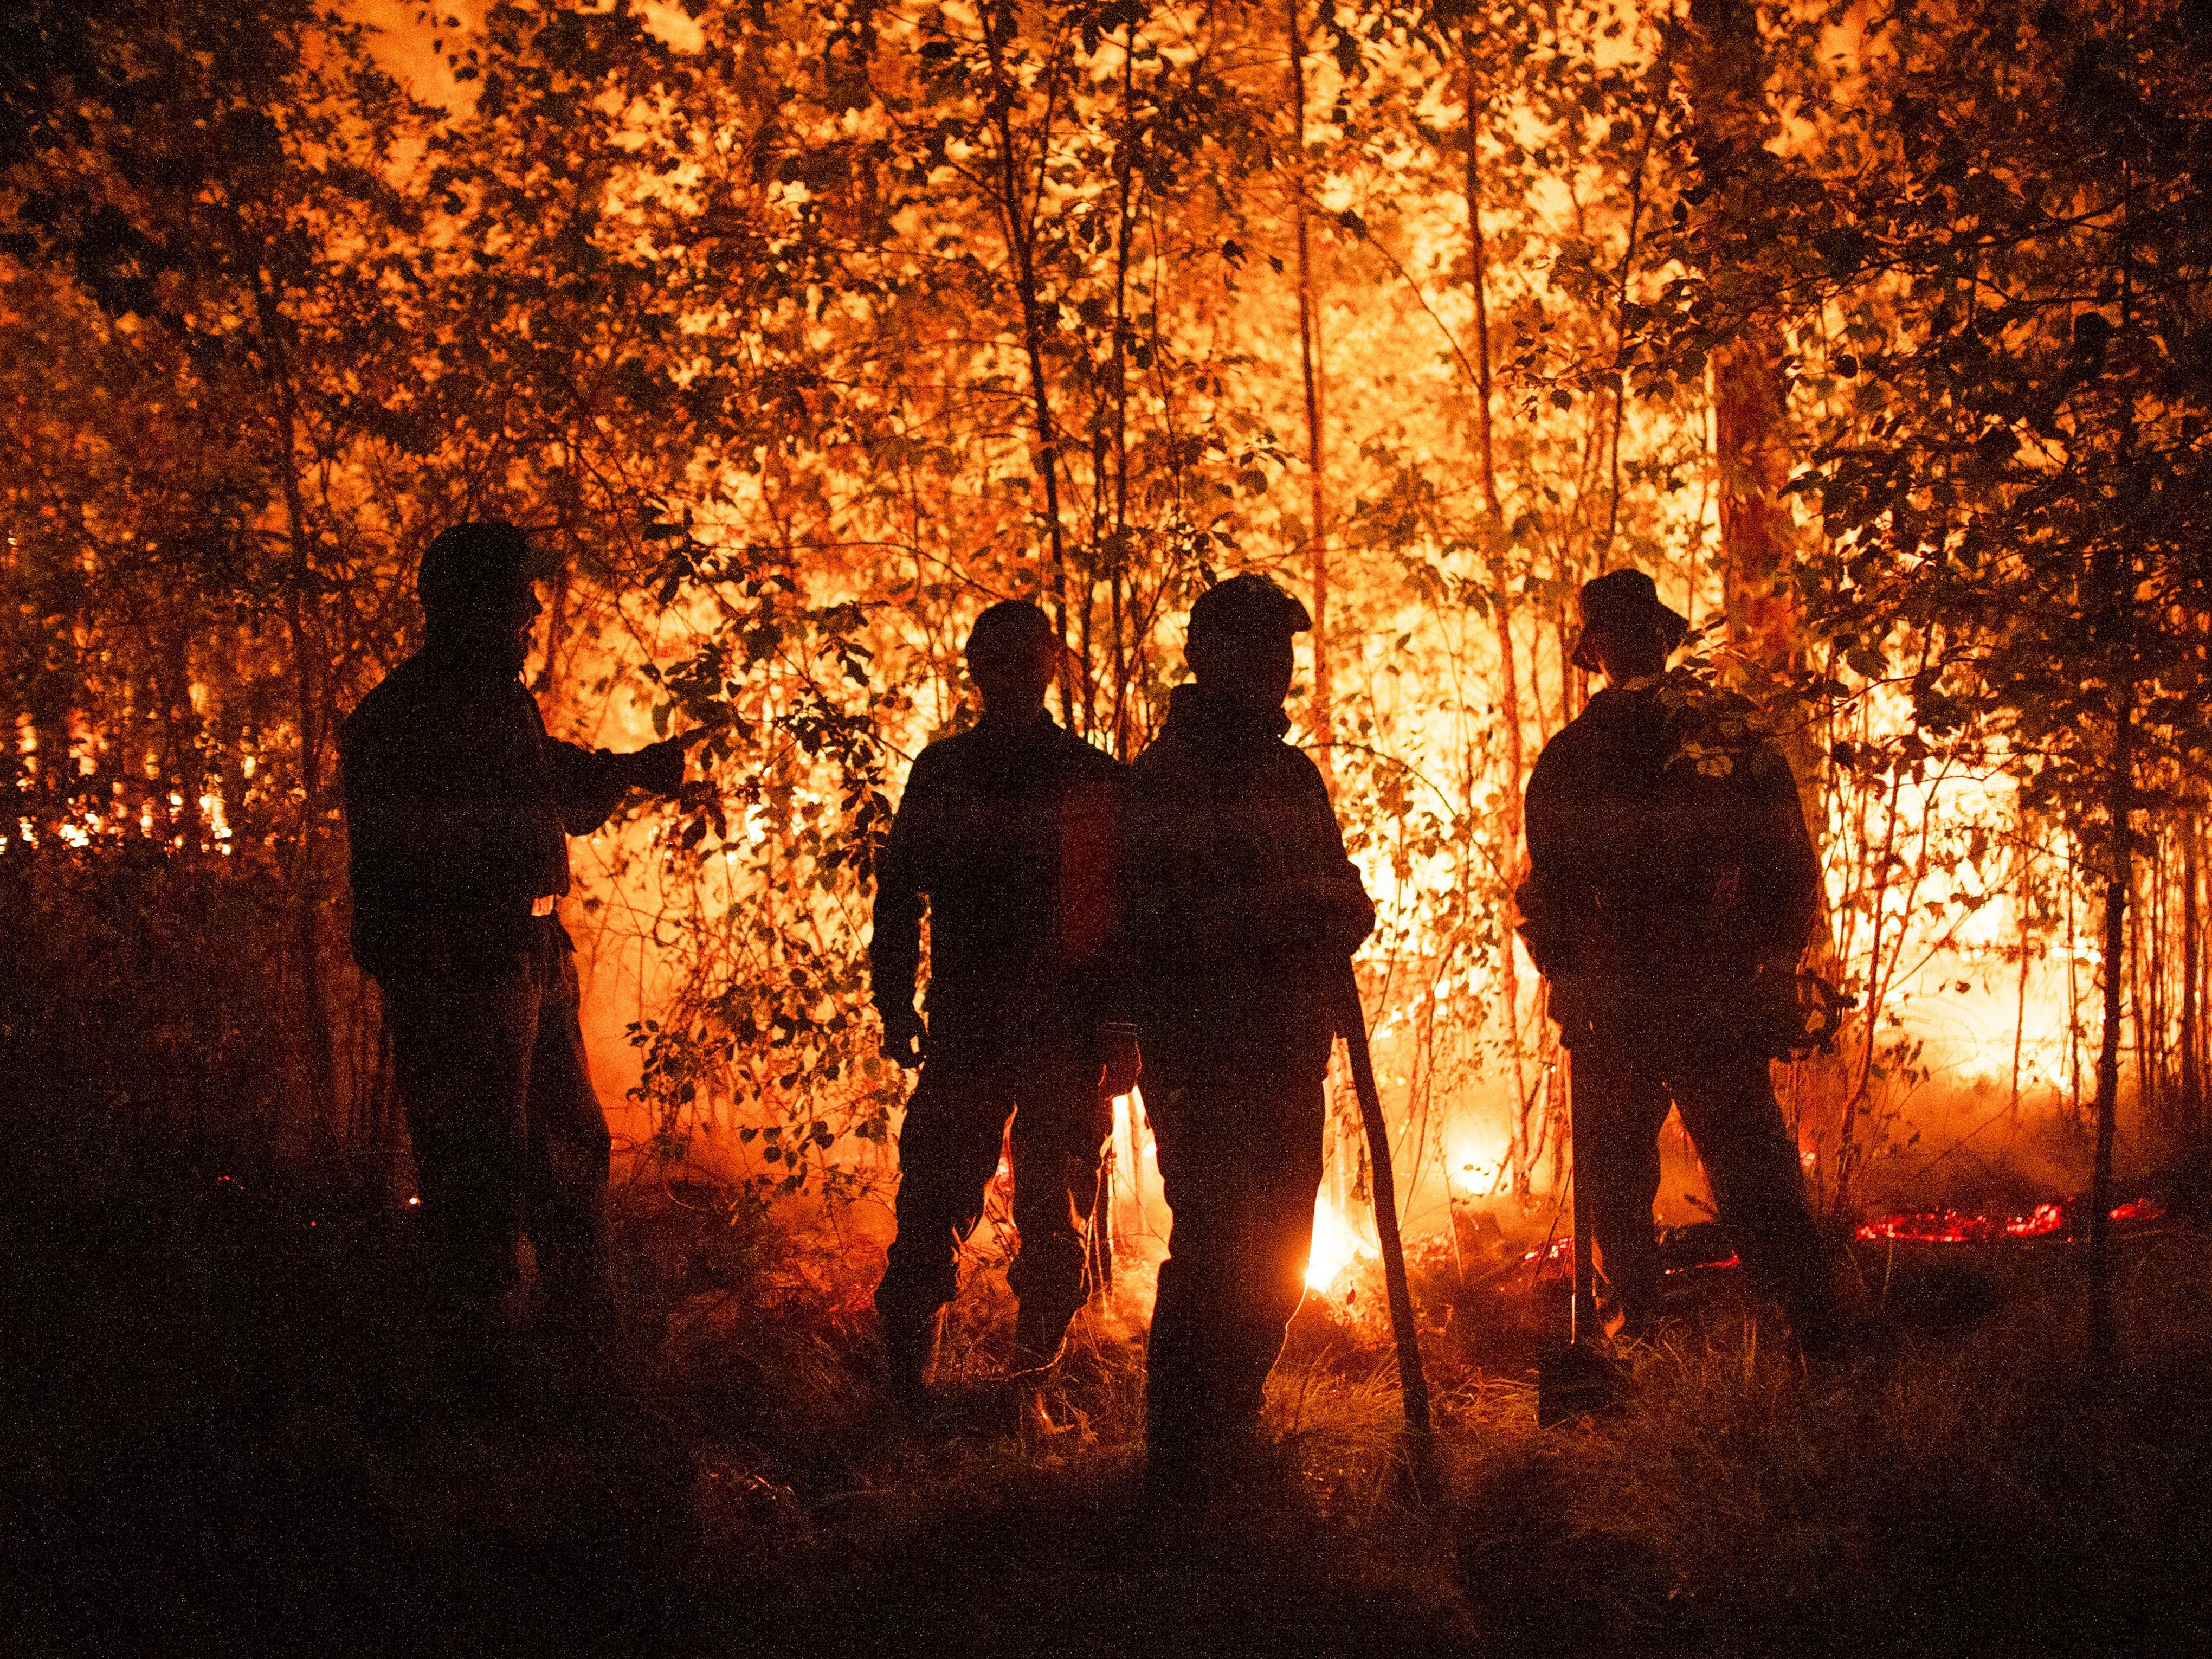 Firefighters work at the scene of forest fire near Kyuyorelyakh village west of Yakutsk, in Russia on Aug. 5, 2021.